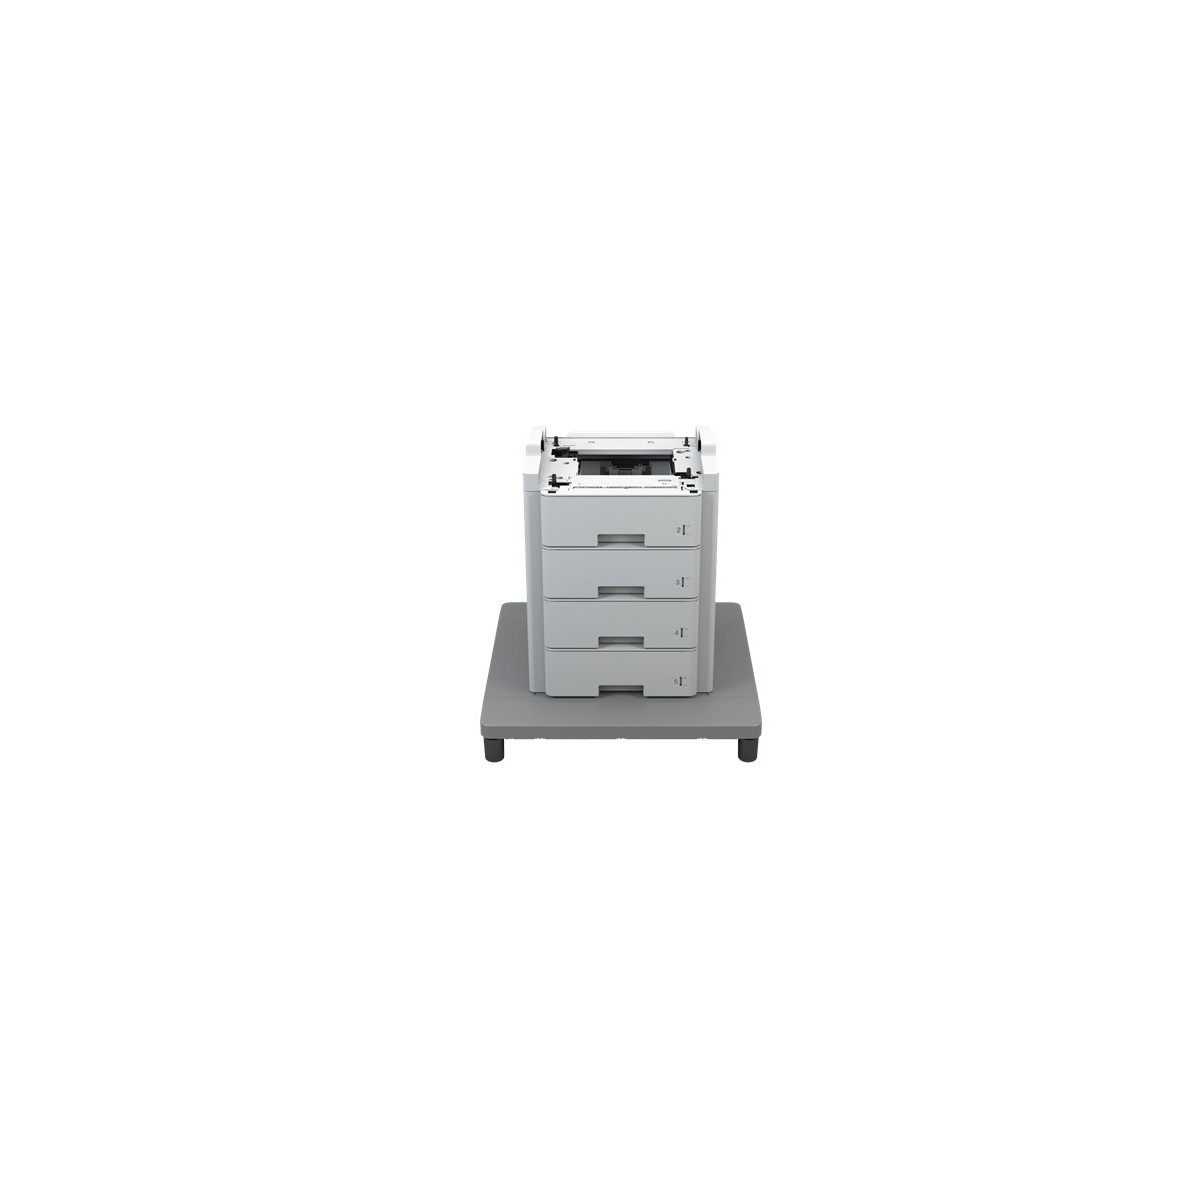 Brother TT-4000 - Multi-Purpose tray - Brother - HL-L6250DN - HL-L6300DW - HL-L6300DWT - HL-L6400DW - HL-L6400DWT - DCP-L6600DW 